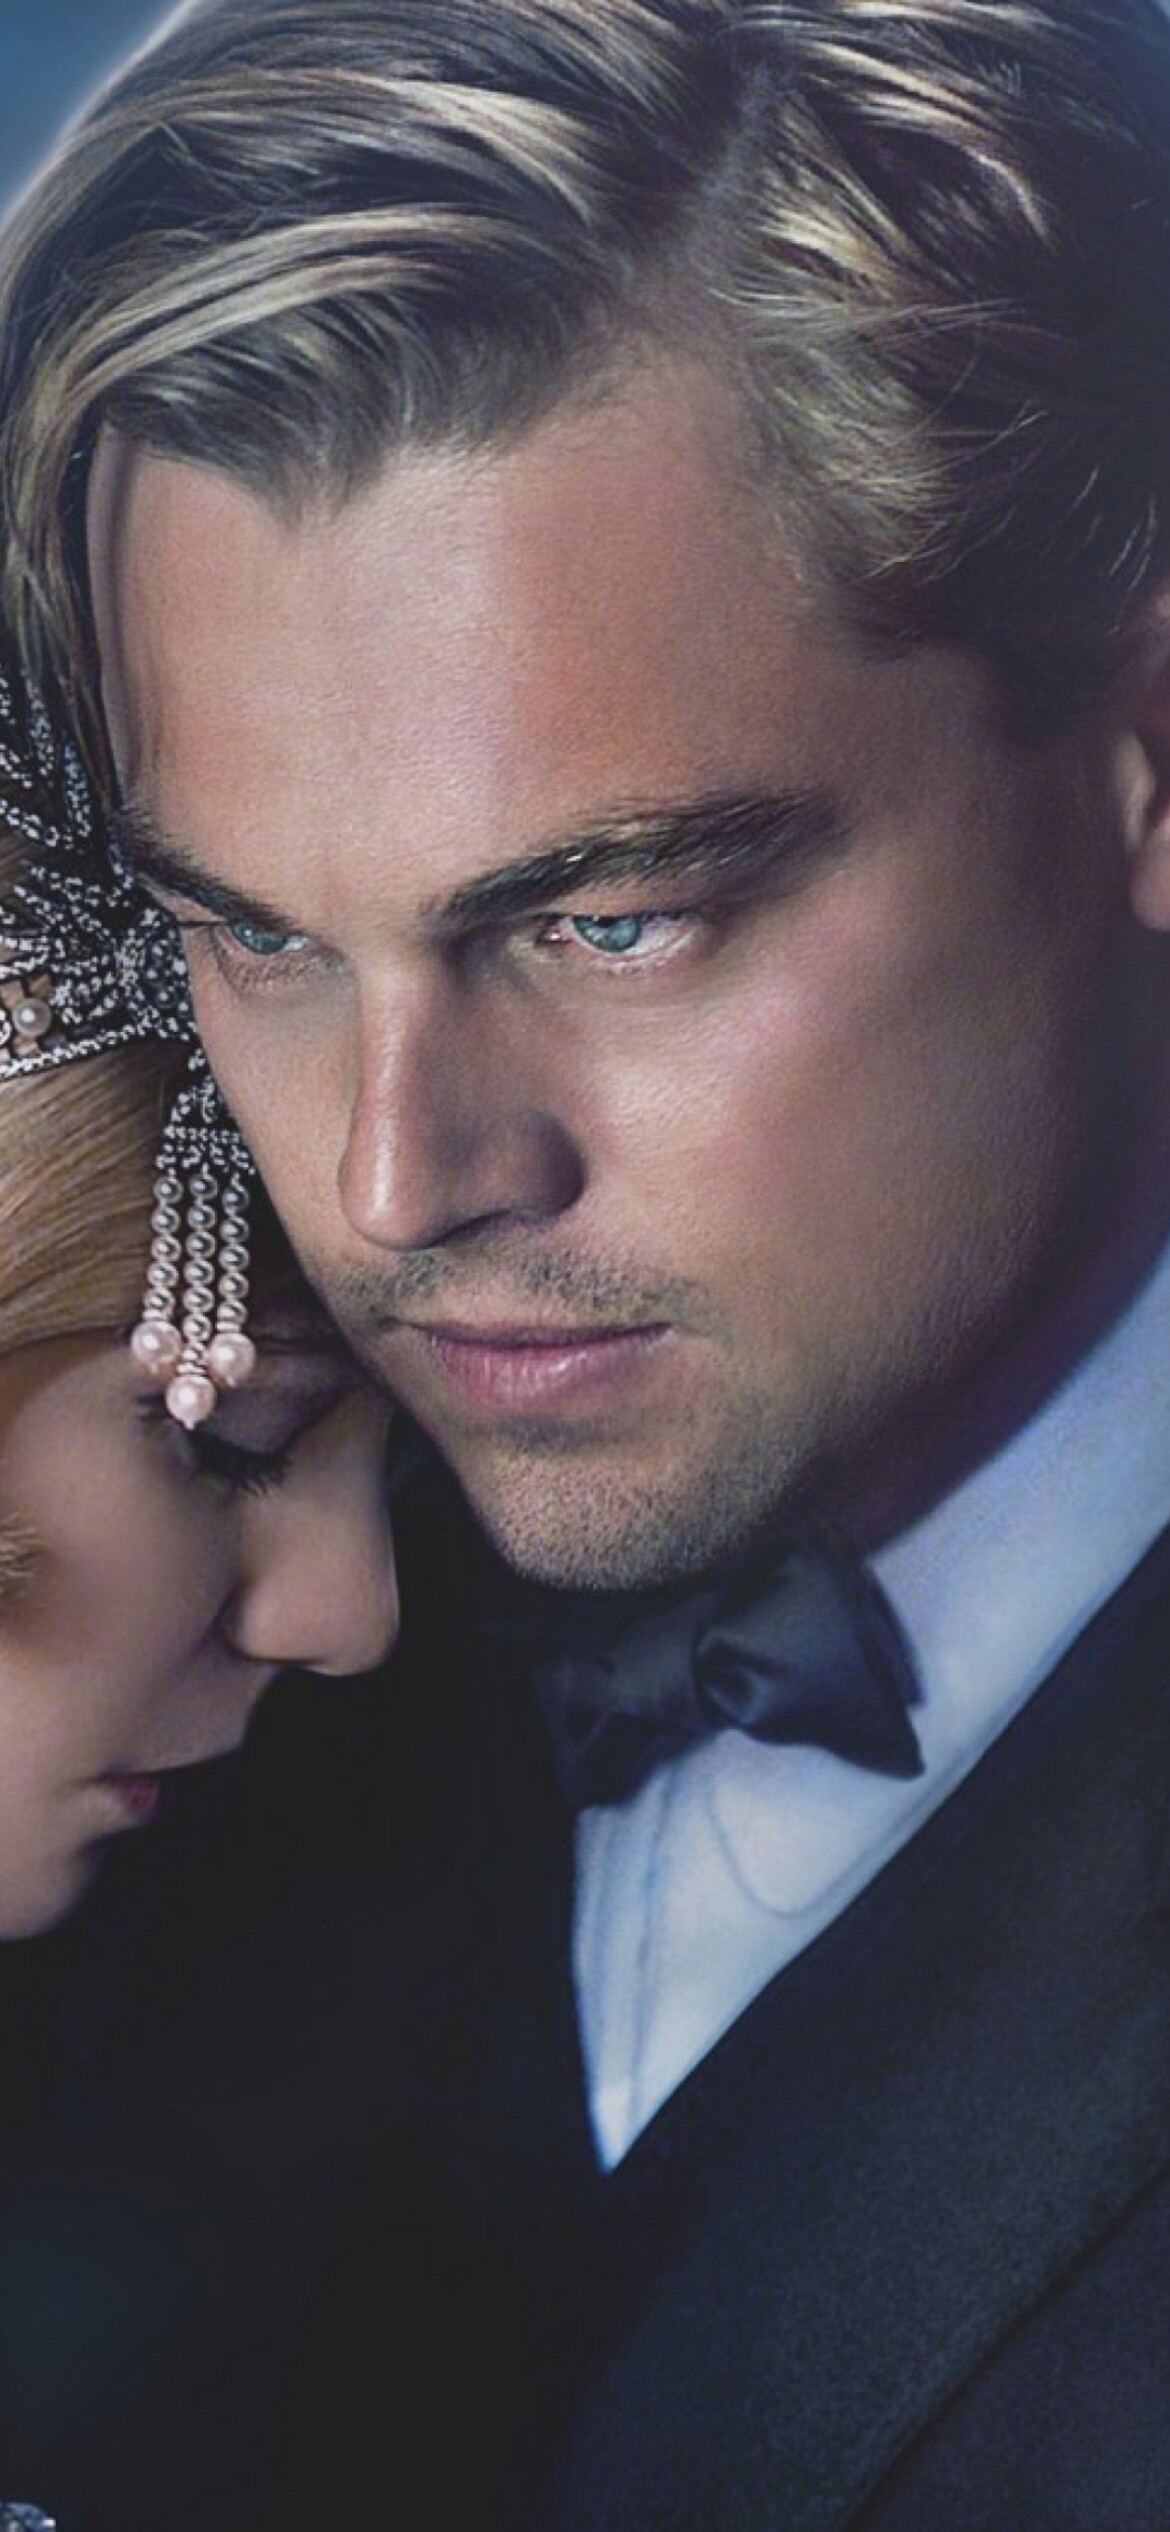 The Great Gatsby: Jay, The epitome of the “self-made man”, Leonardo DiCaprio. 1170x2540 HD Wallpaper.